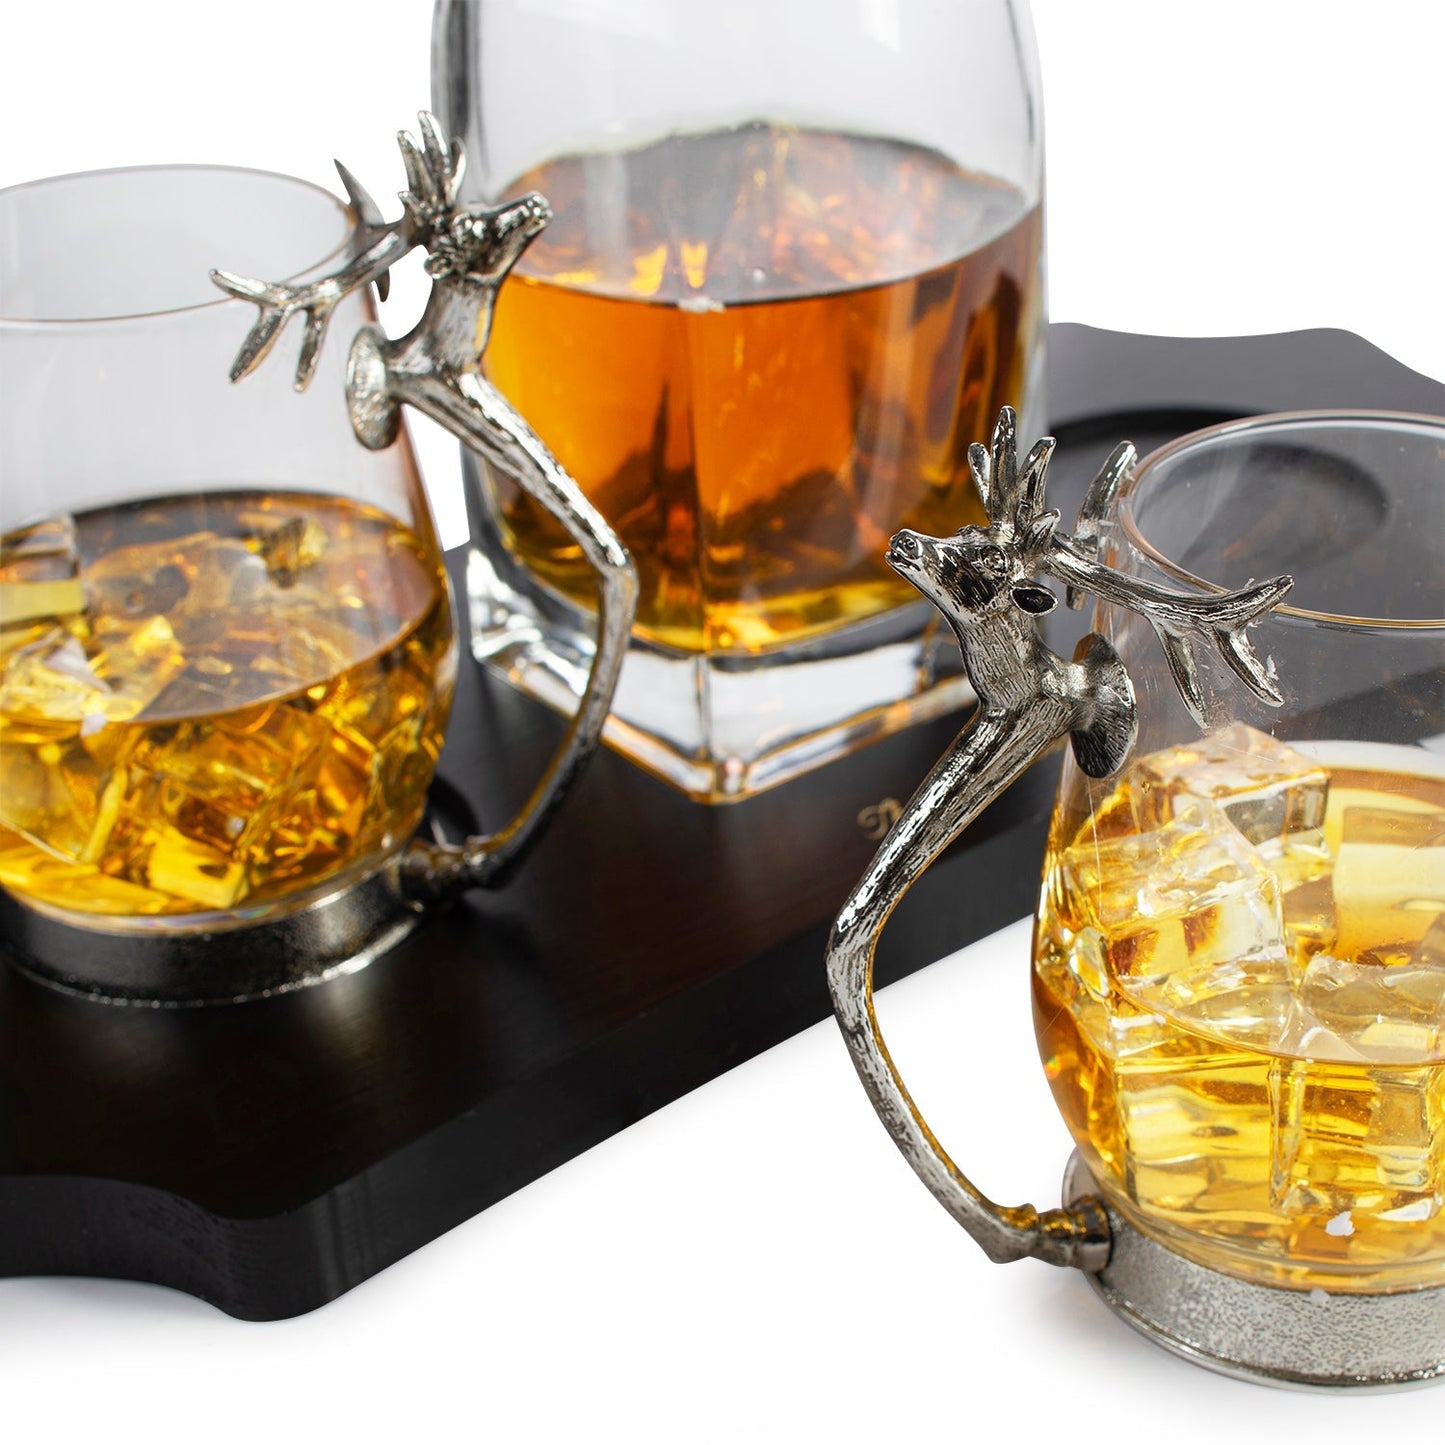 Stag Antler Decanter Set with 2 Stag Glasses - Antique Pewter Whiskey Decanter Set Elegant Liquor Decanter Gift Set for Bar by The Wine Savant - Luxury Decanter for Bourbon, Scotch, or Whiskey 750ml-1